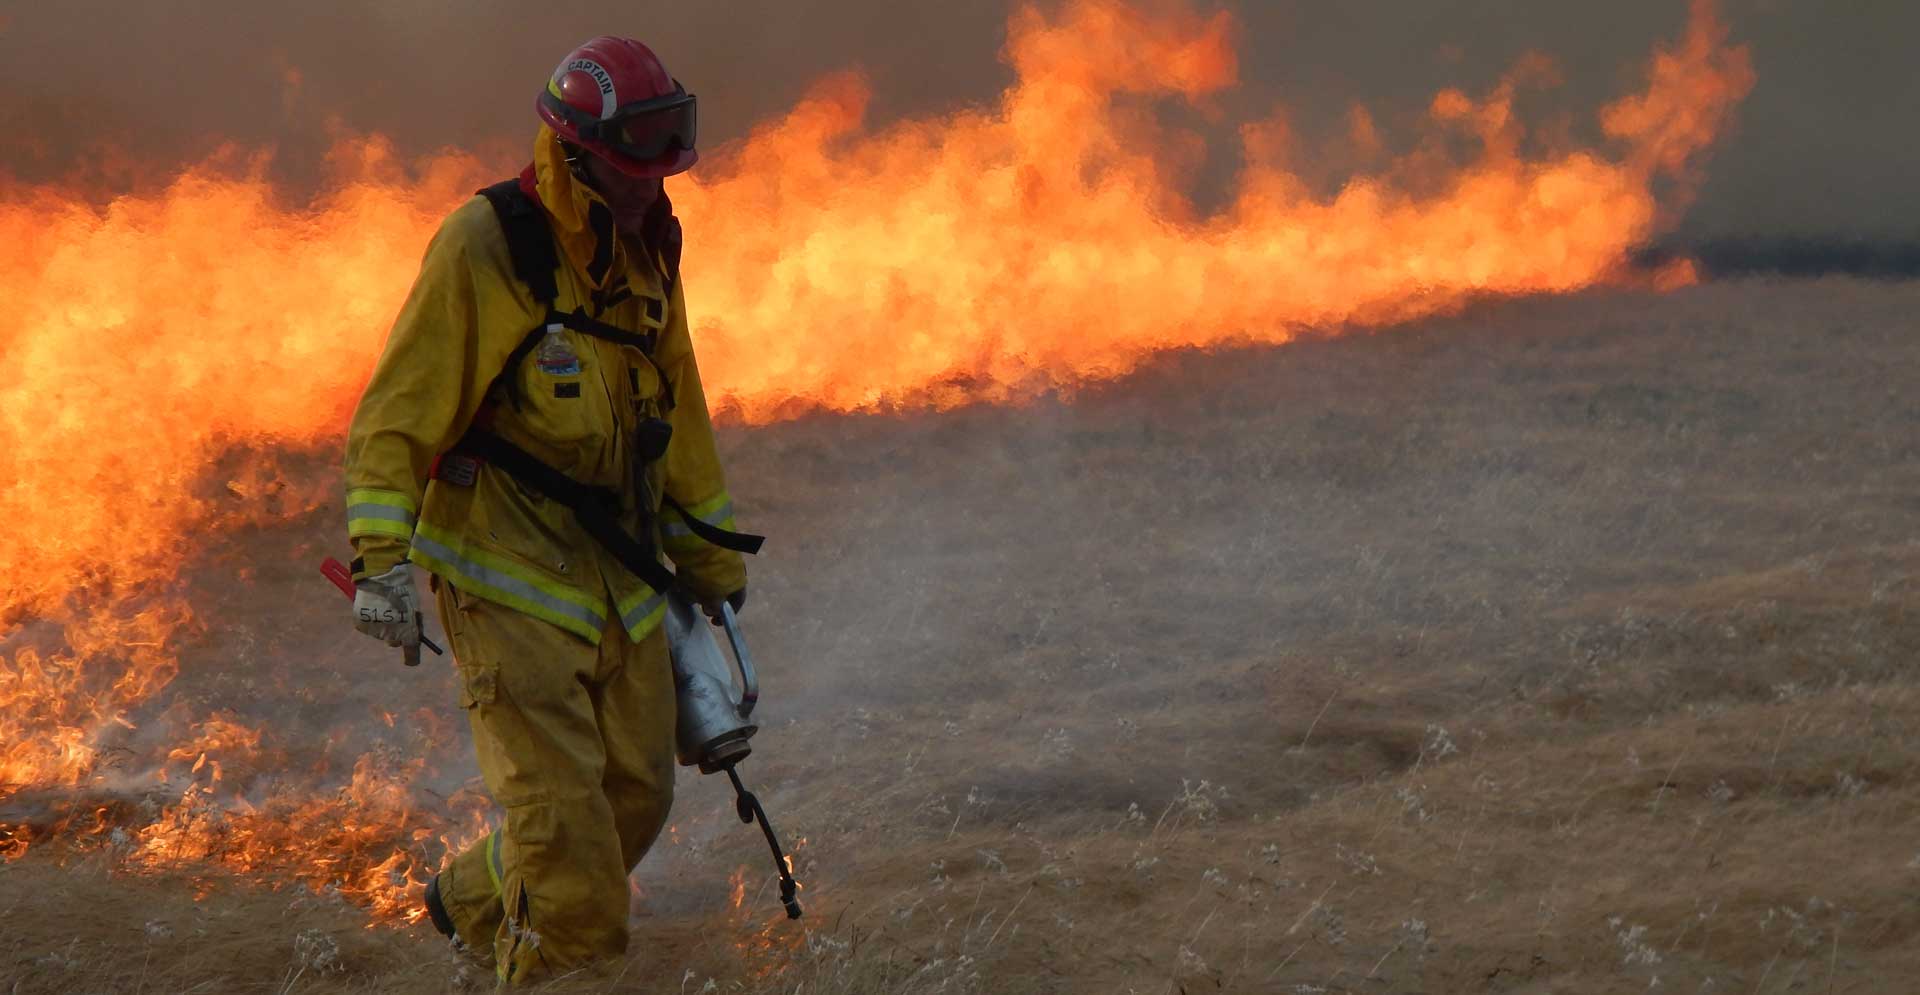 A firefighter lights browned grass on fire in a field for a control burn